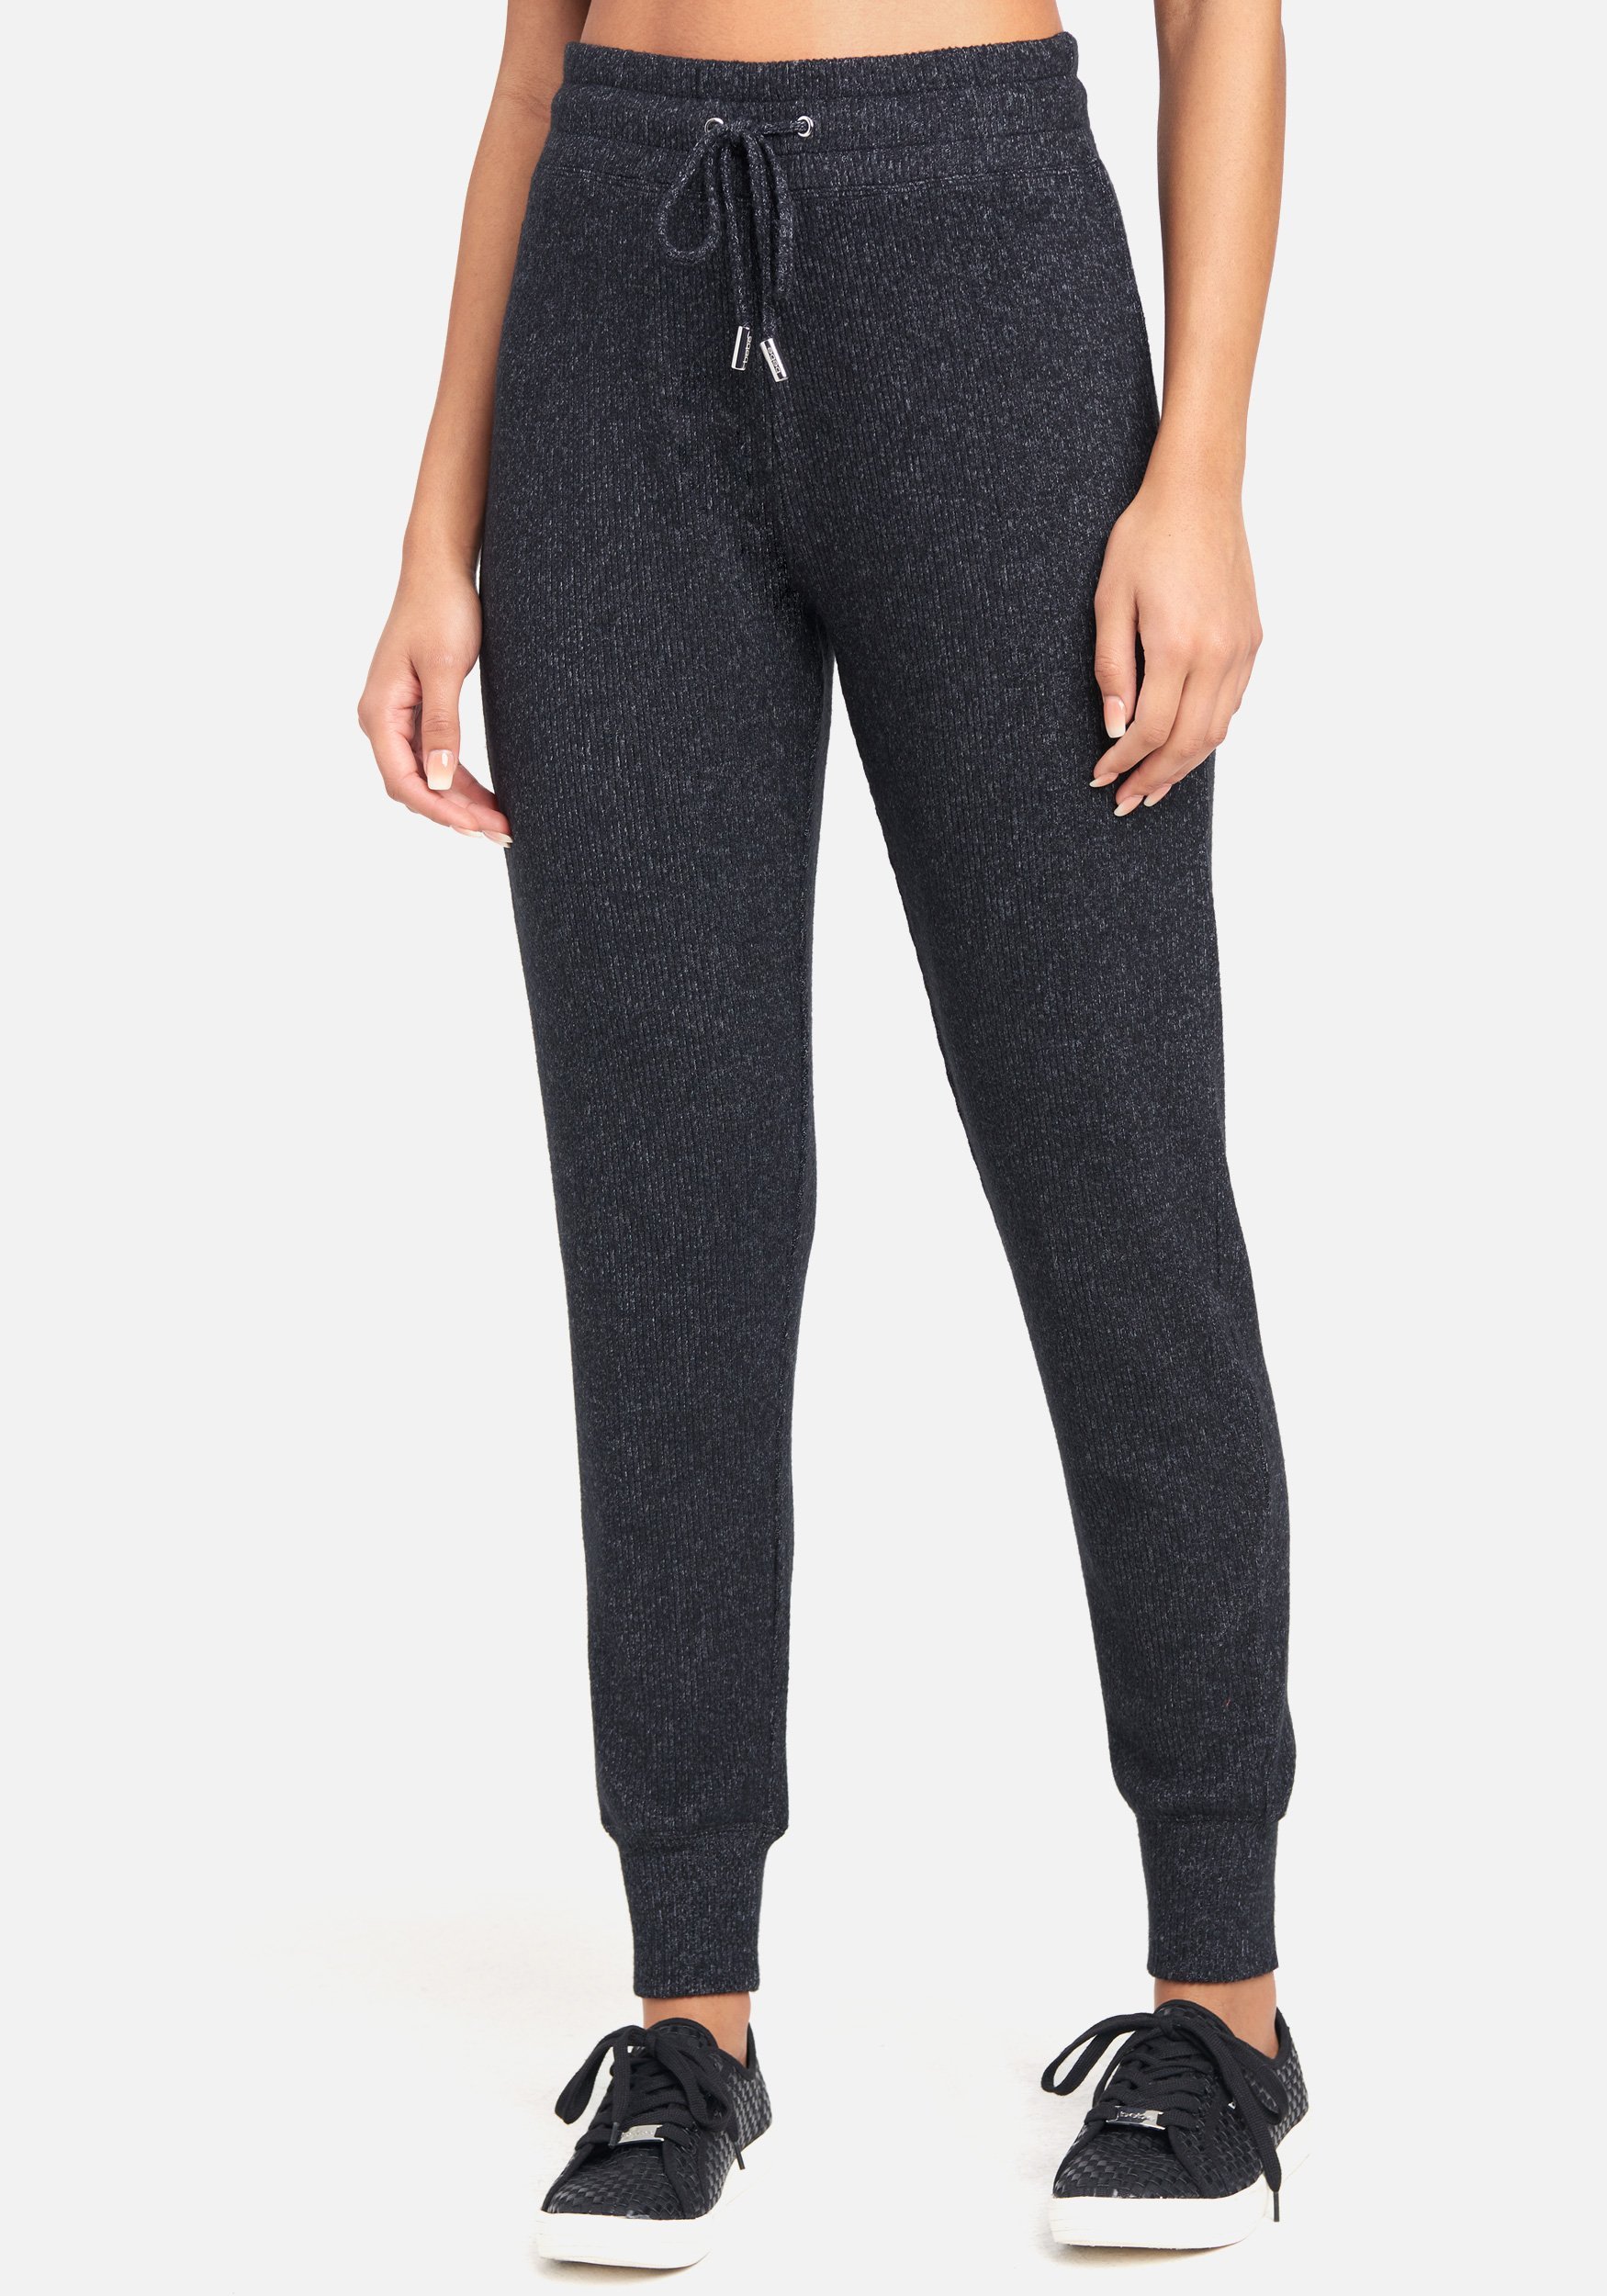 Bebe Women's Sweater Knit Jogger Pant, Size Large in Charcoal Grey Spandex/Viscose